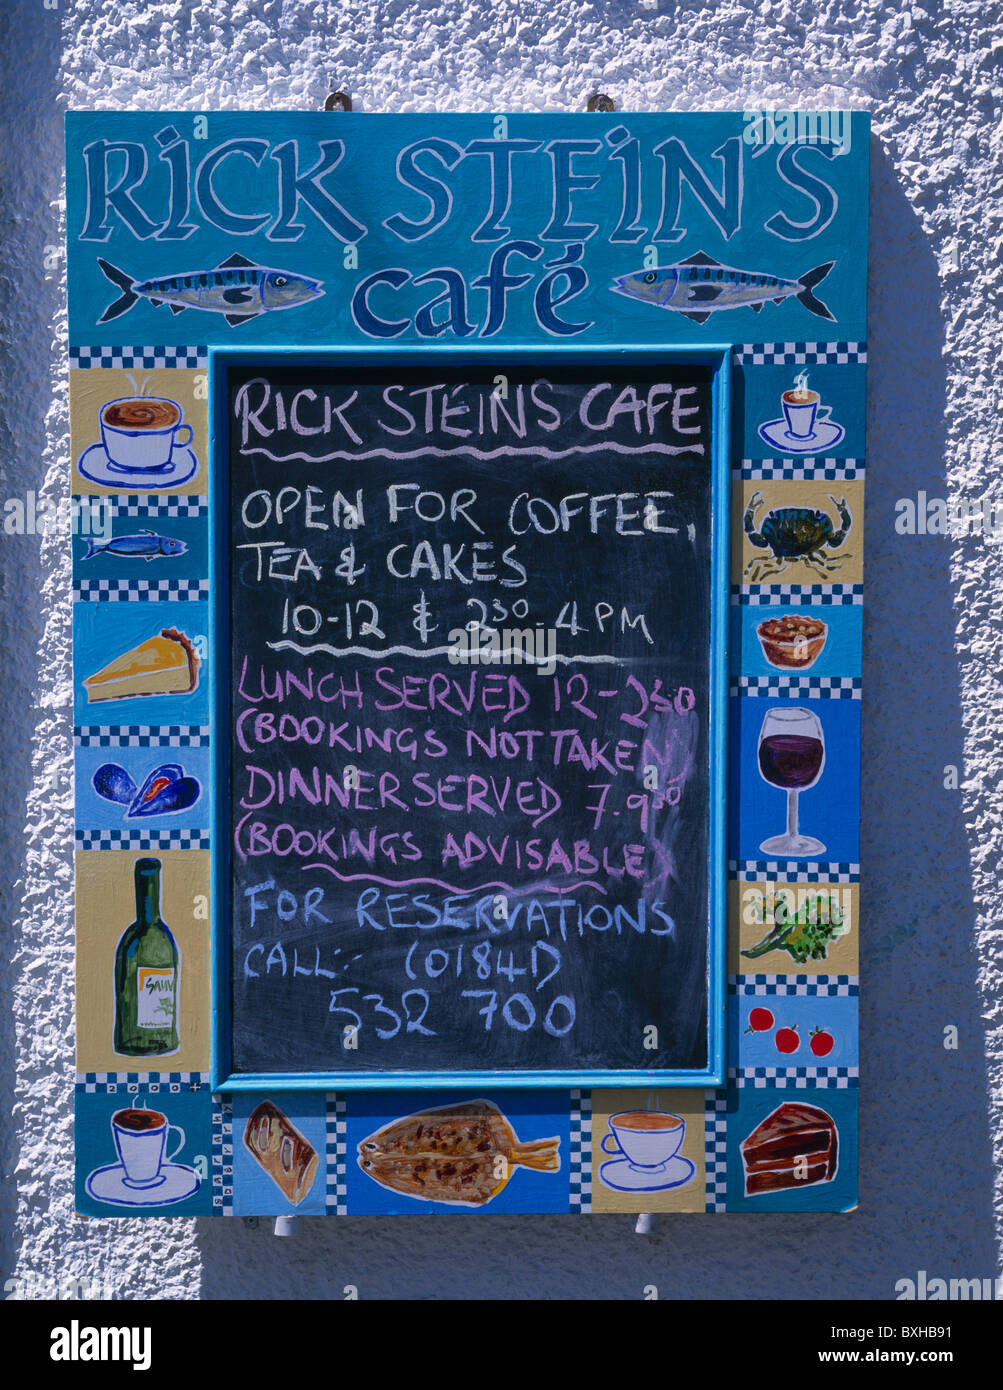 Rick Steins cafe sign, Padstow, Cornwall, England Stock Photo